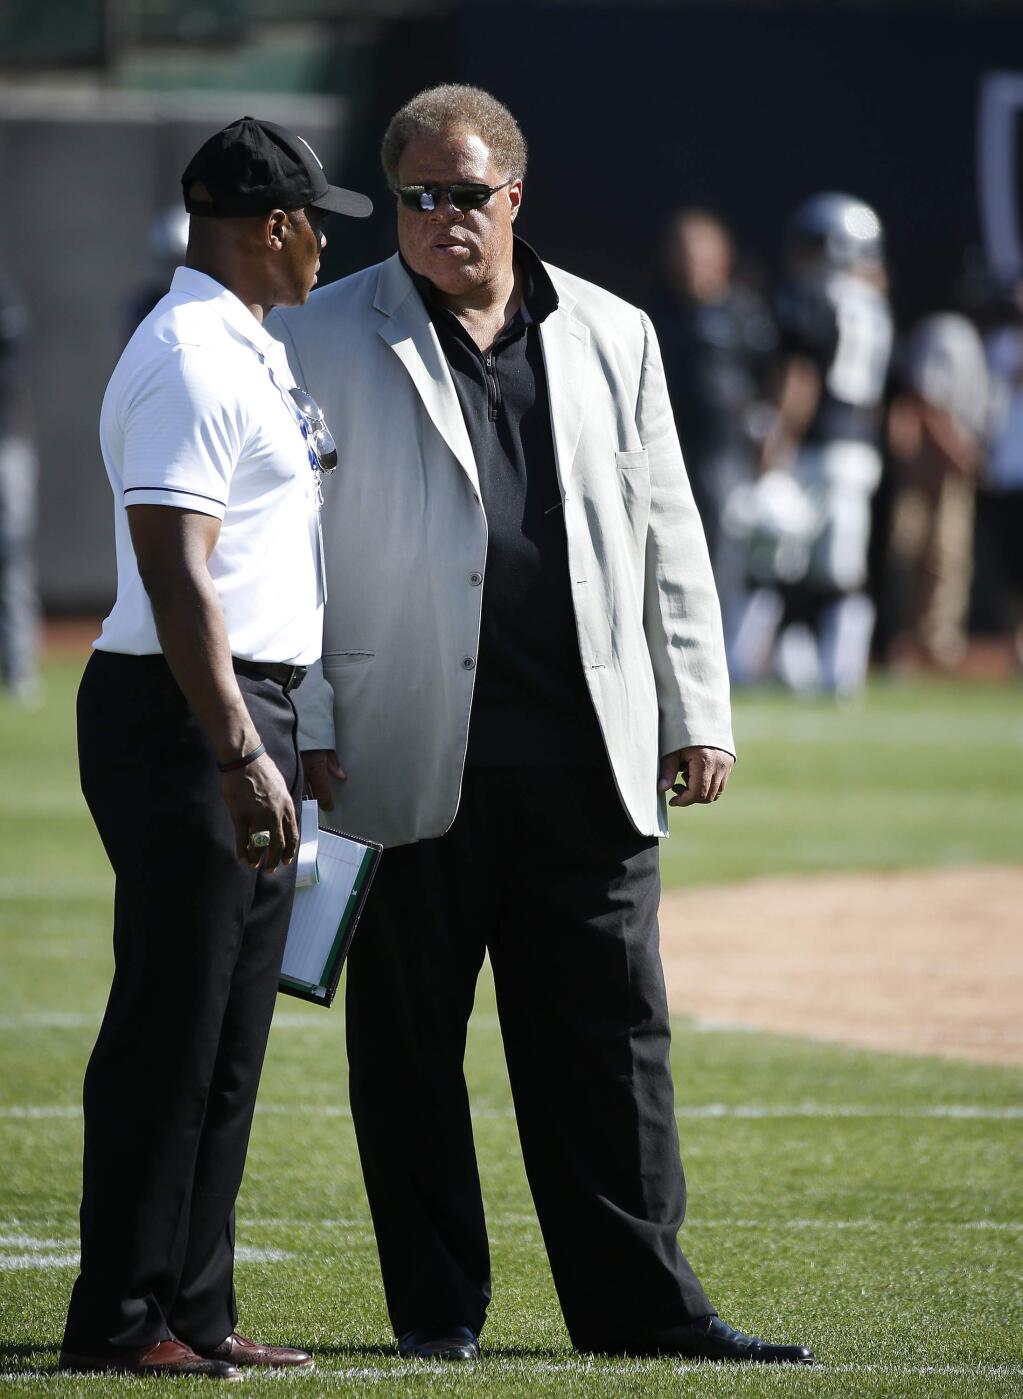 Oakland Raiders general manager Reggie McKenzie, right, stands on the sidelines before the start of a game against the Tennessee Titans Saturday, Aug. 27, 2016, in Oakland. (AP Photo/Tony Avelar)